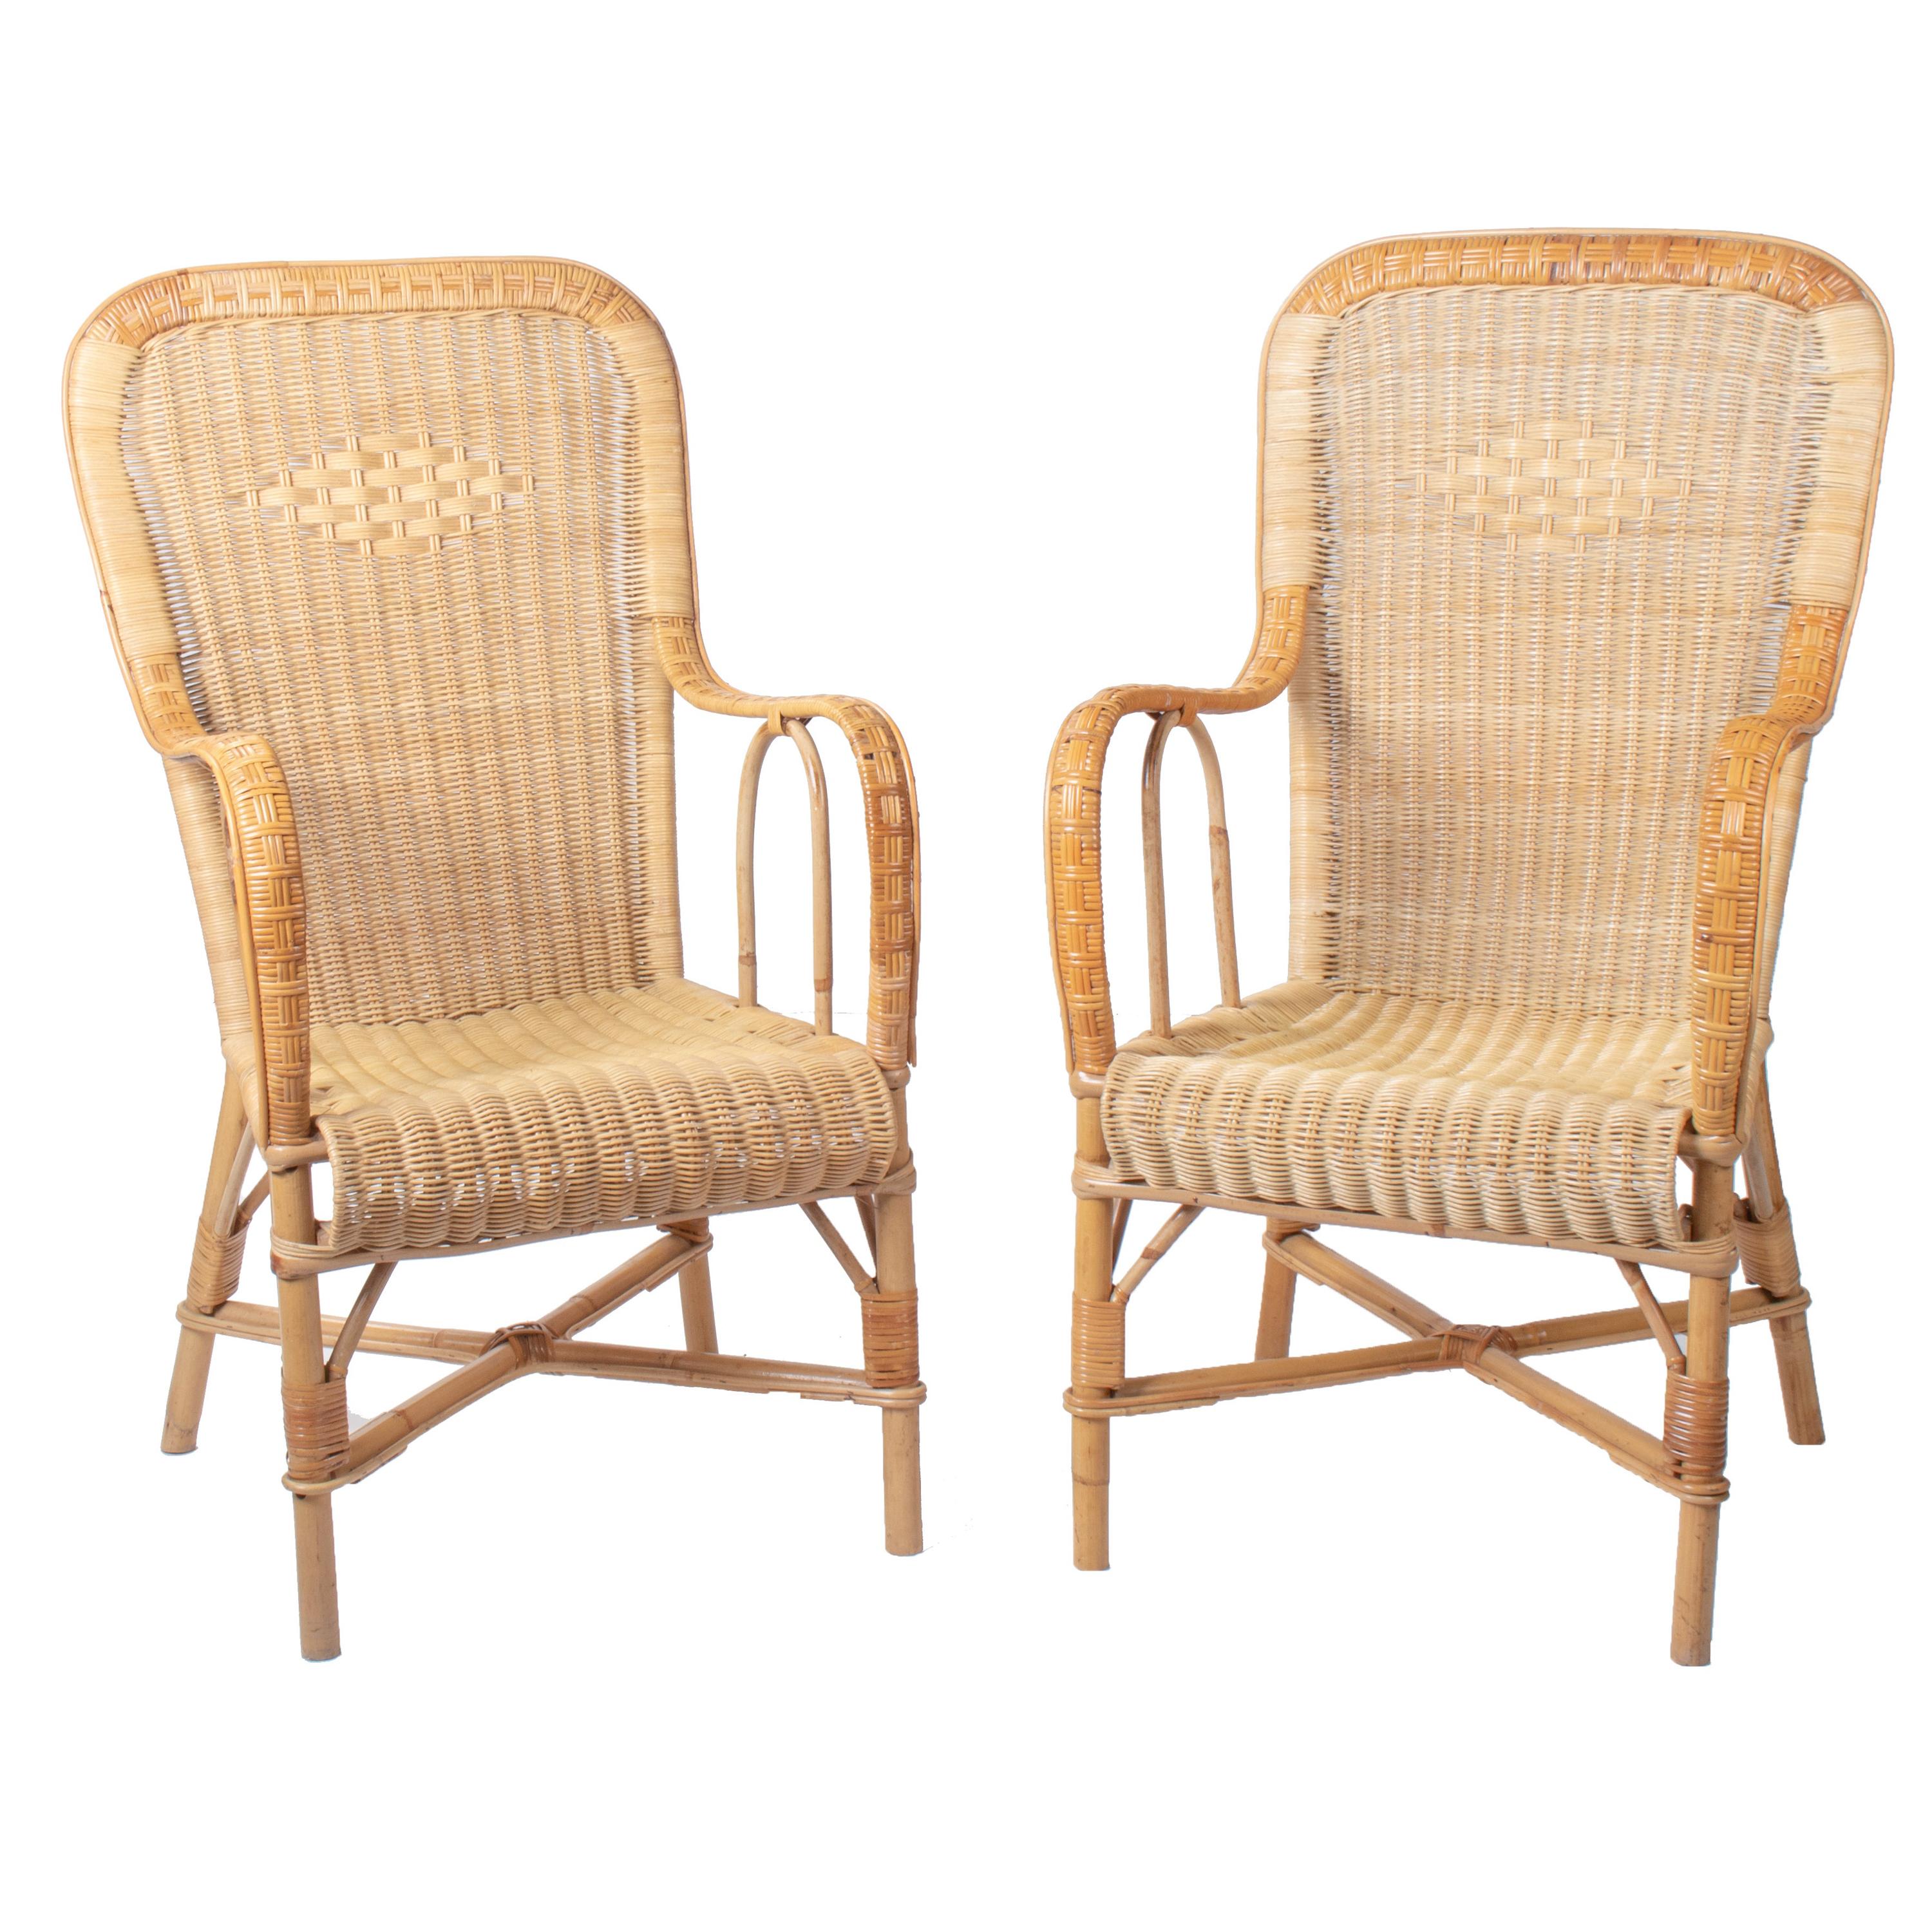 1970s Pair of Spanish Wicker and Bamboo Handmade Armchairs For Sale